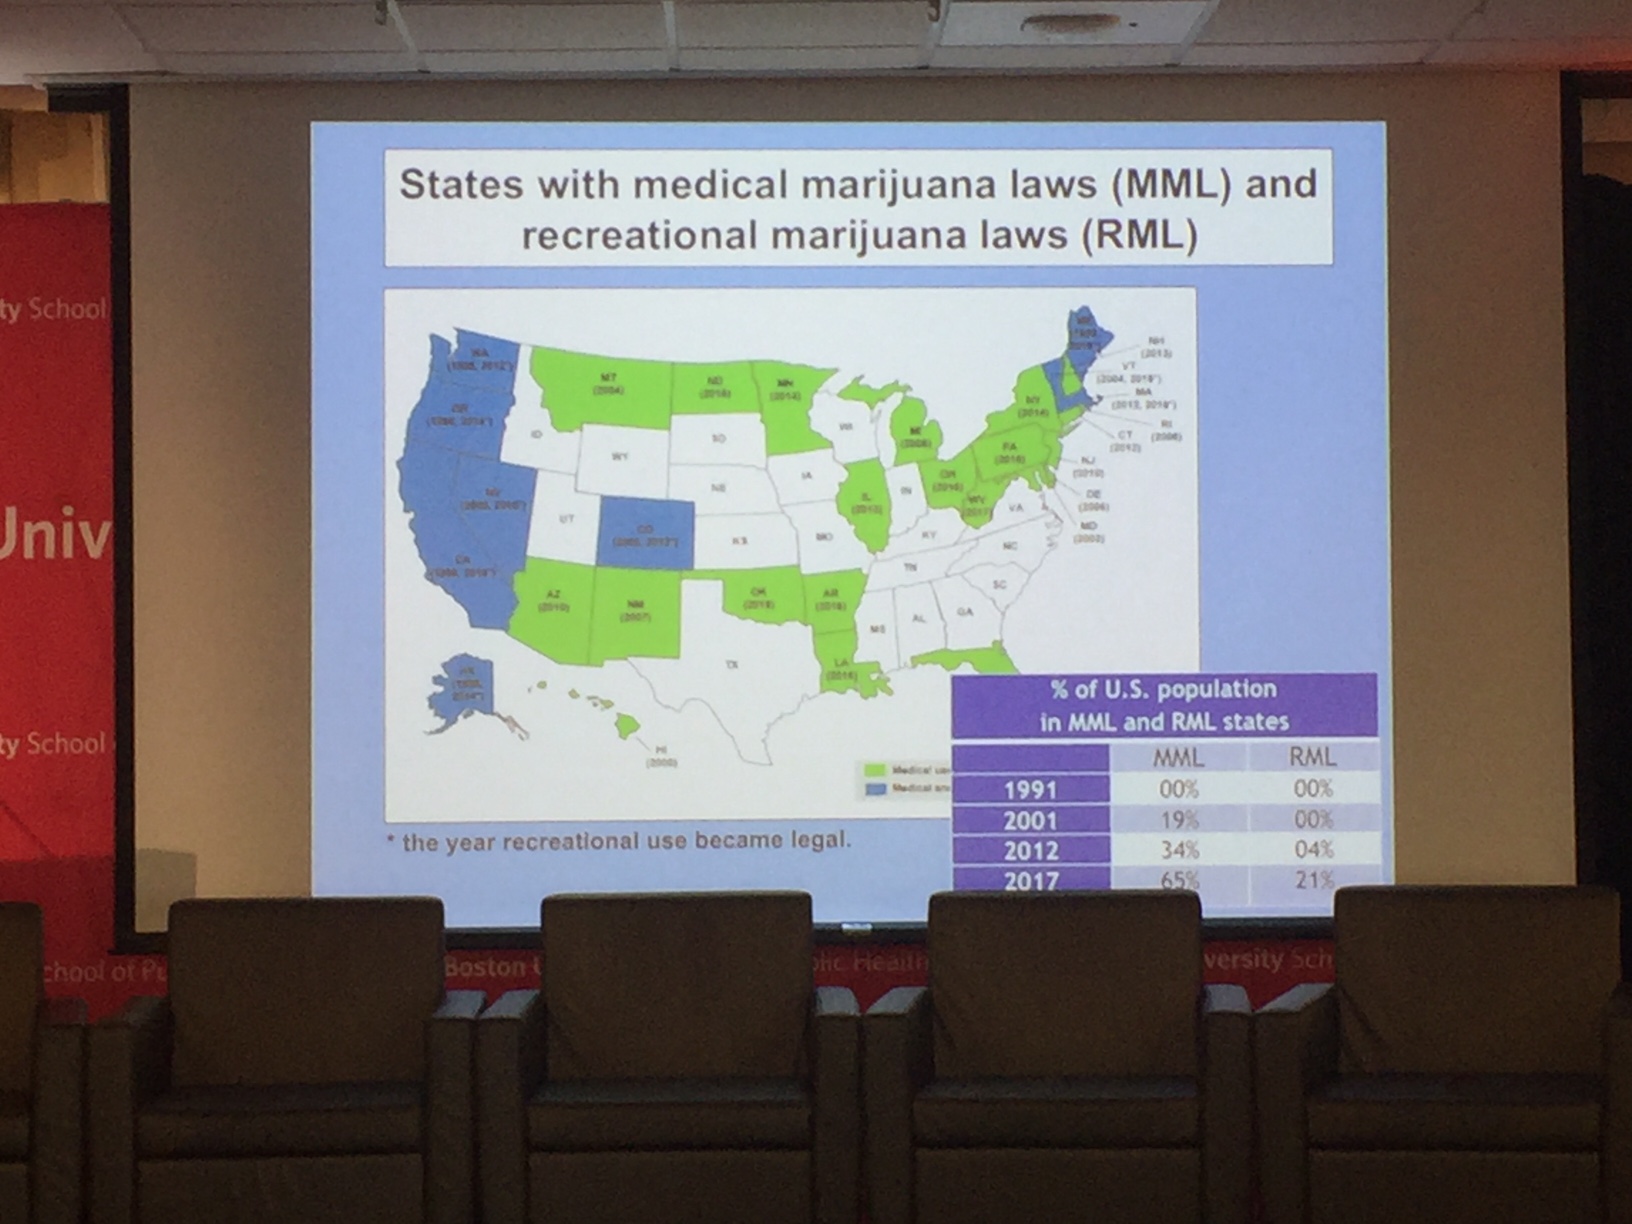 Map of the United States. Overview of states with medical marijuana laws and recreational marijuana laws.